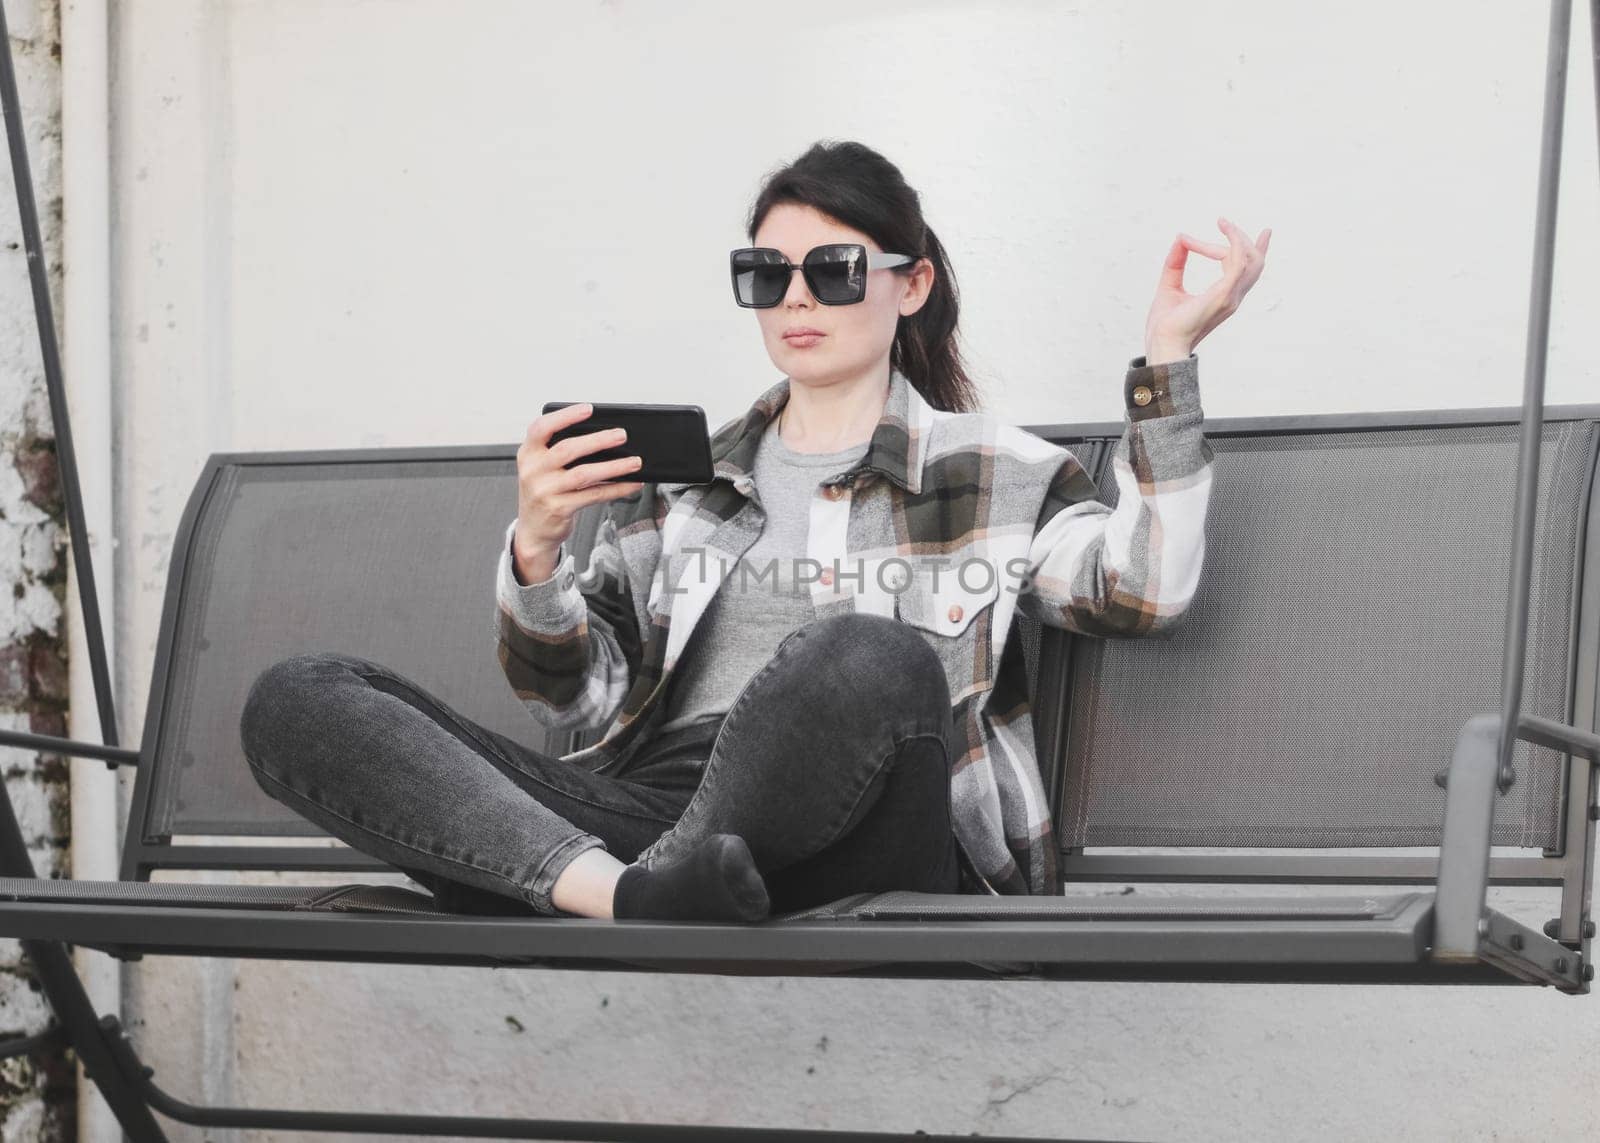 A young beautiful caucasian girl in a plaid shirt, gray jeans and sunglasses holds a smartphone in her hand and learns meditation online, sitting on a garden swing against a white wall in the backyard of her house, close-up side view. Concept using technology, social media, online chats, modern lifestyle, at home, social media, online meditation, course.